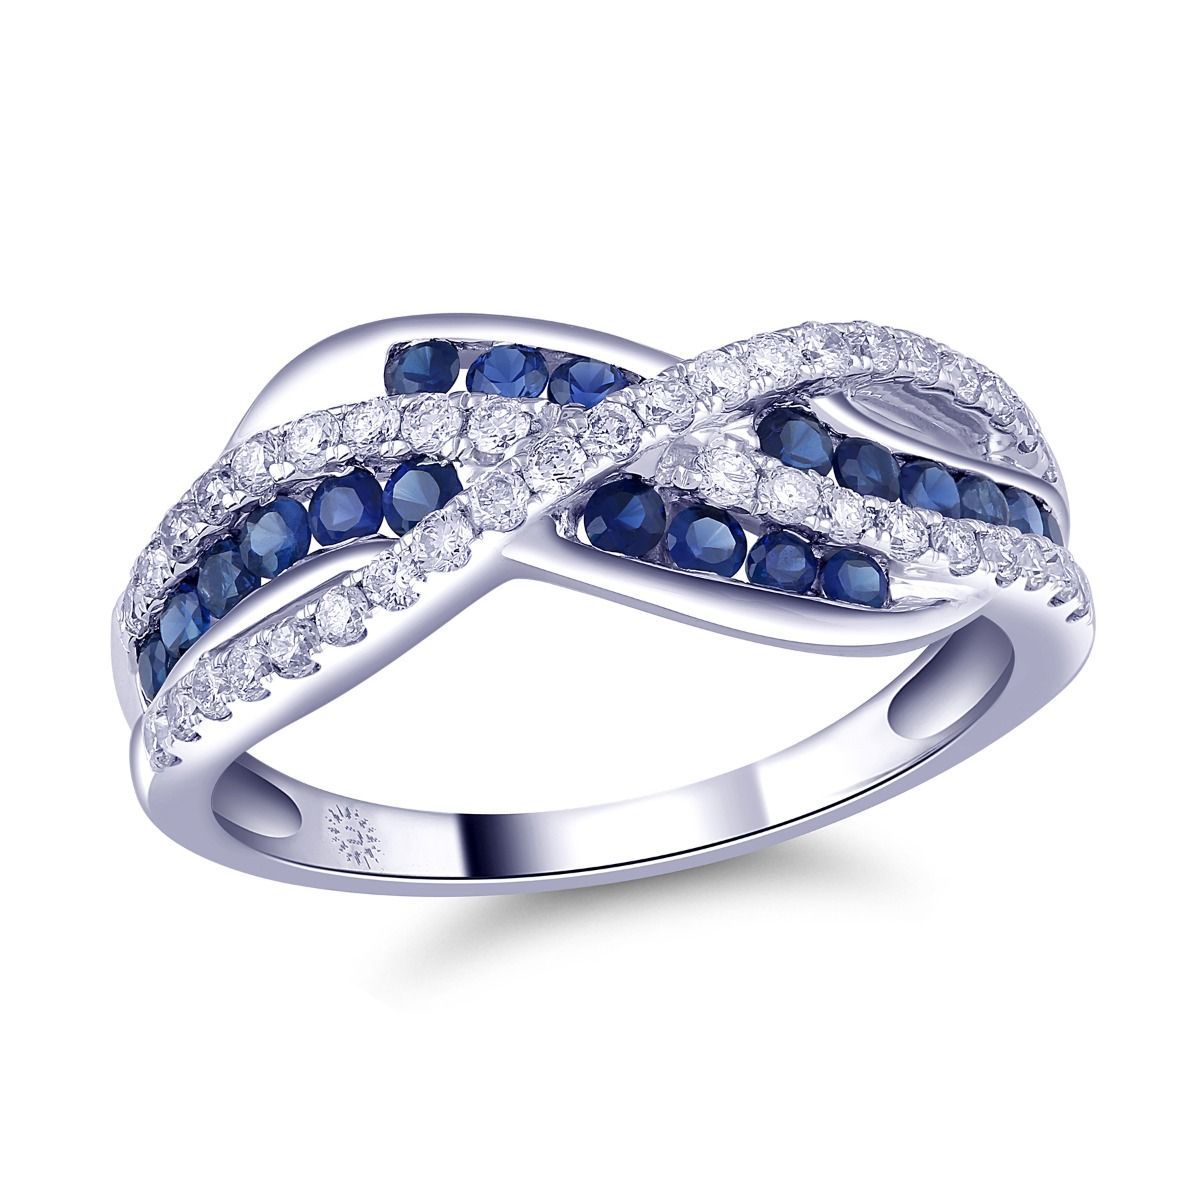 Genuine Sapphire And Diamond Multi Row Anniversary Band In 14k White Gold,  3/8ctw With Regard To Most Recently Released Diamond Multi Row Anniversary Bands In White Gold (View 13 of 25)